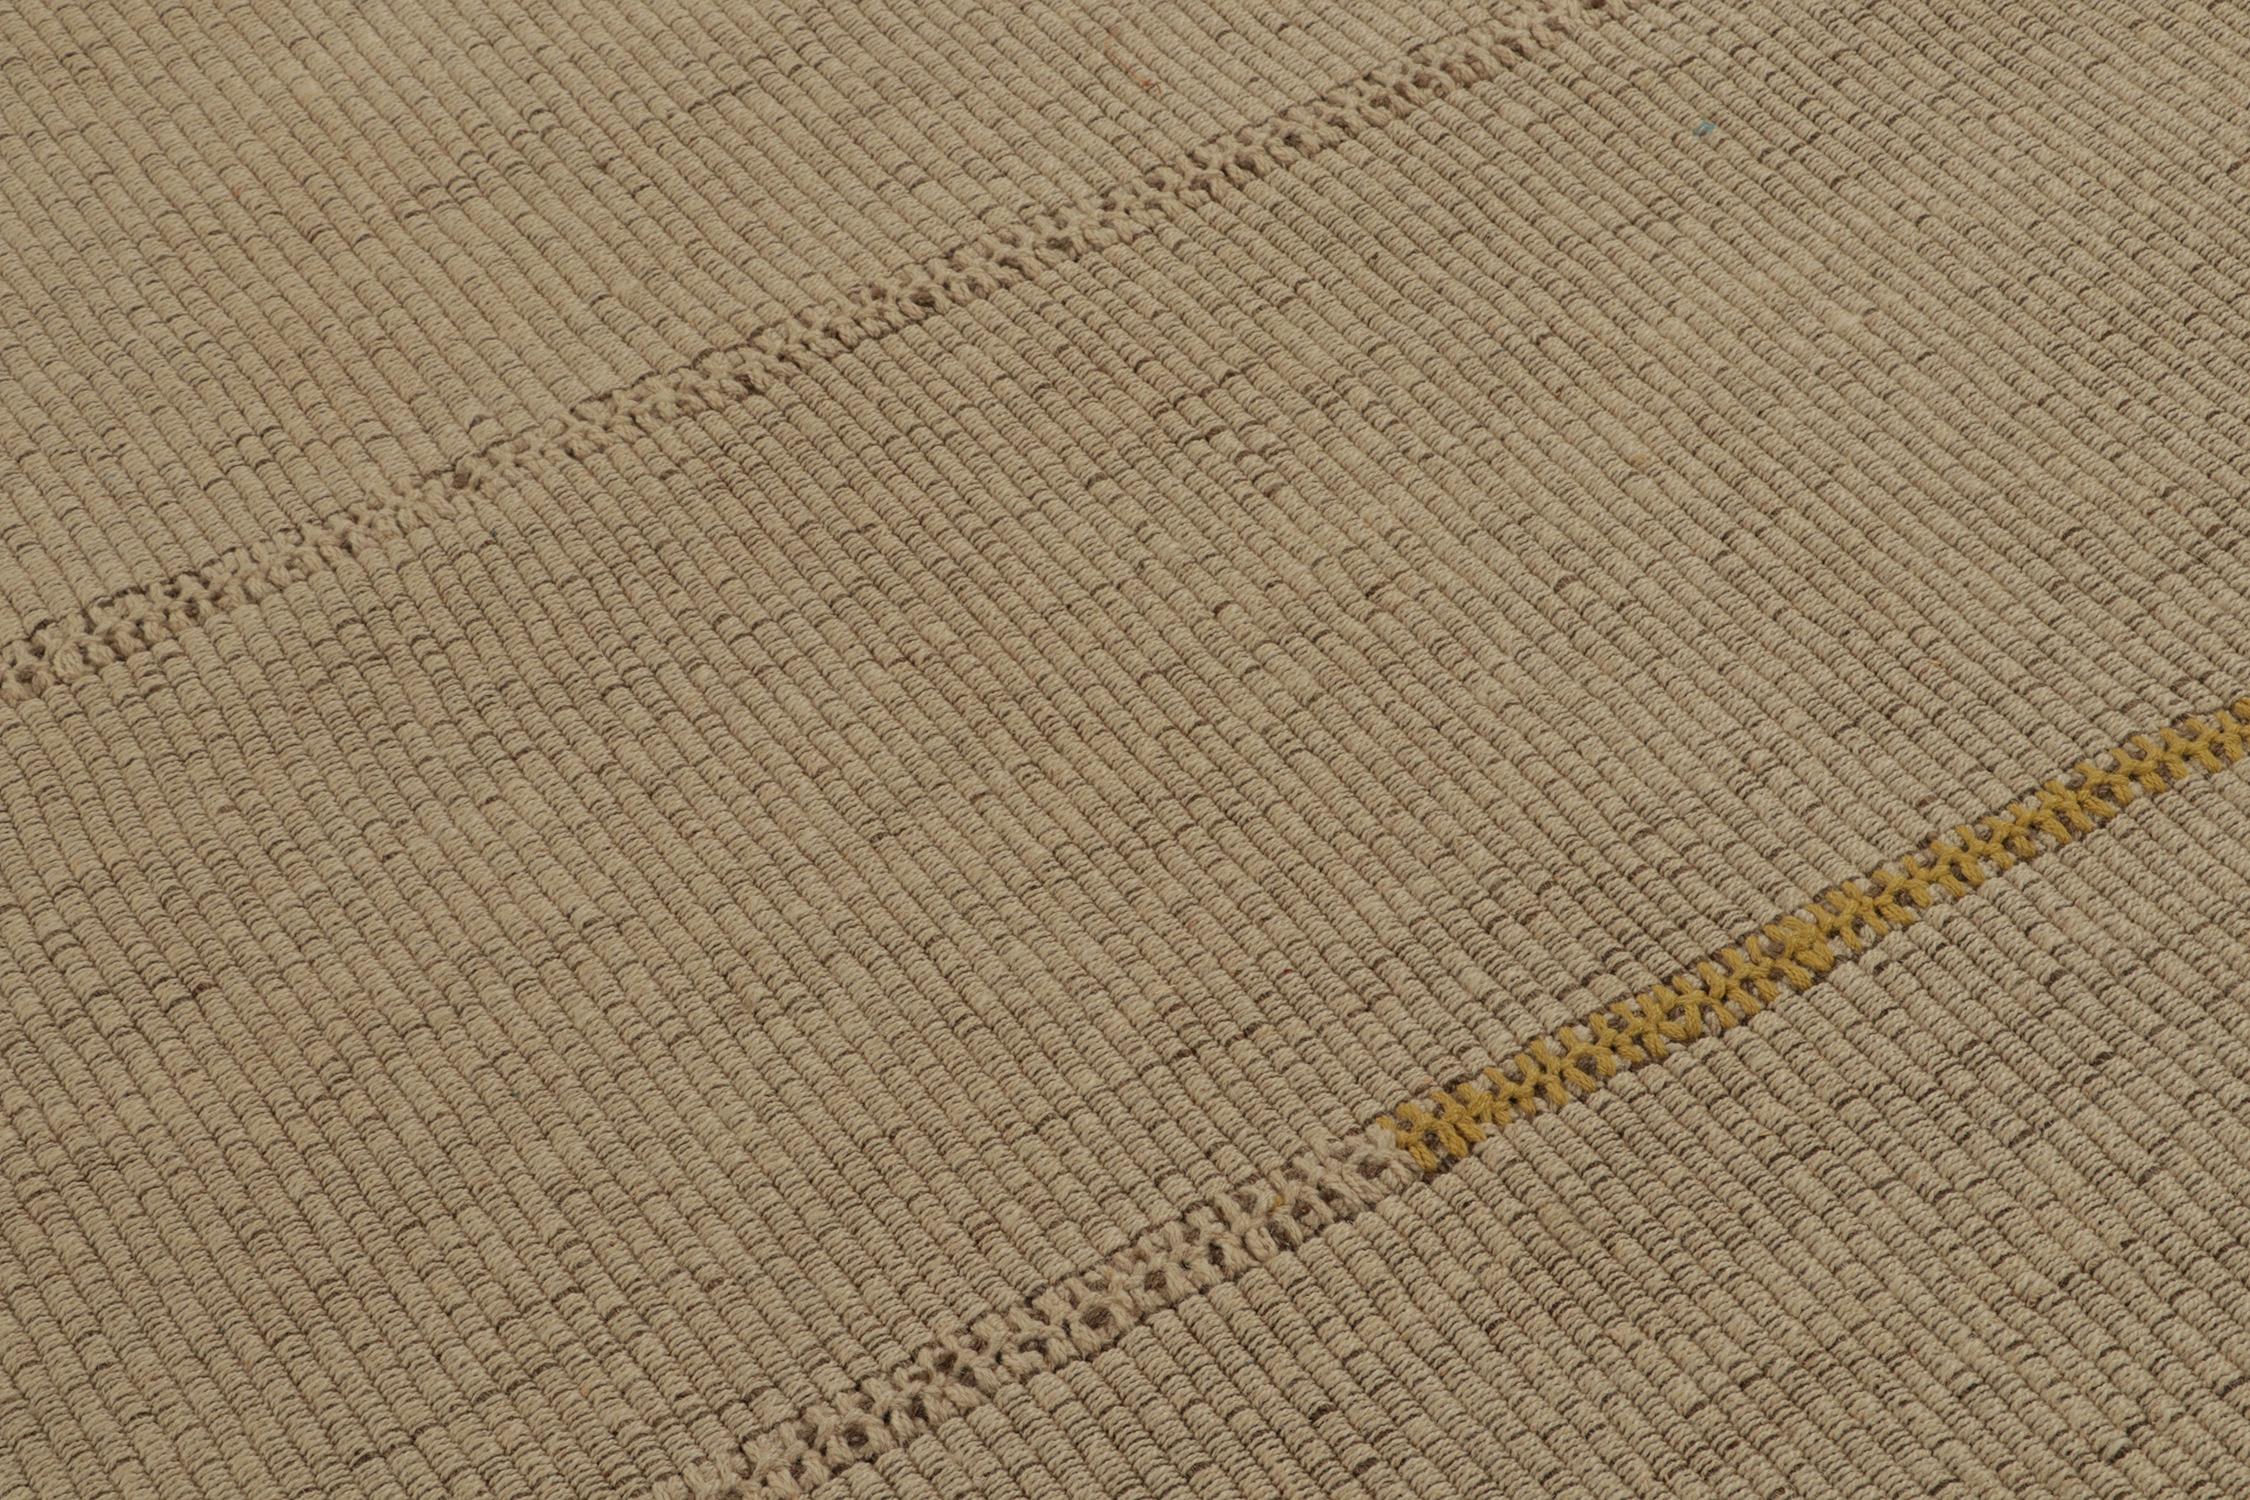 Rug & Kilim’s Contemporary Kilim in Beige with Gold and Brown Accents In New Condition For Sale In Long Island City, NY